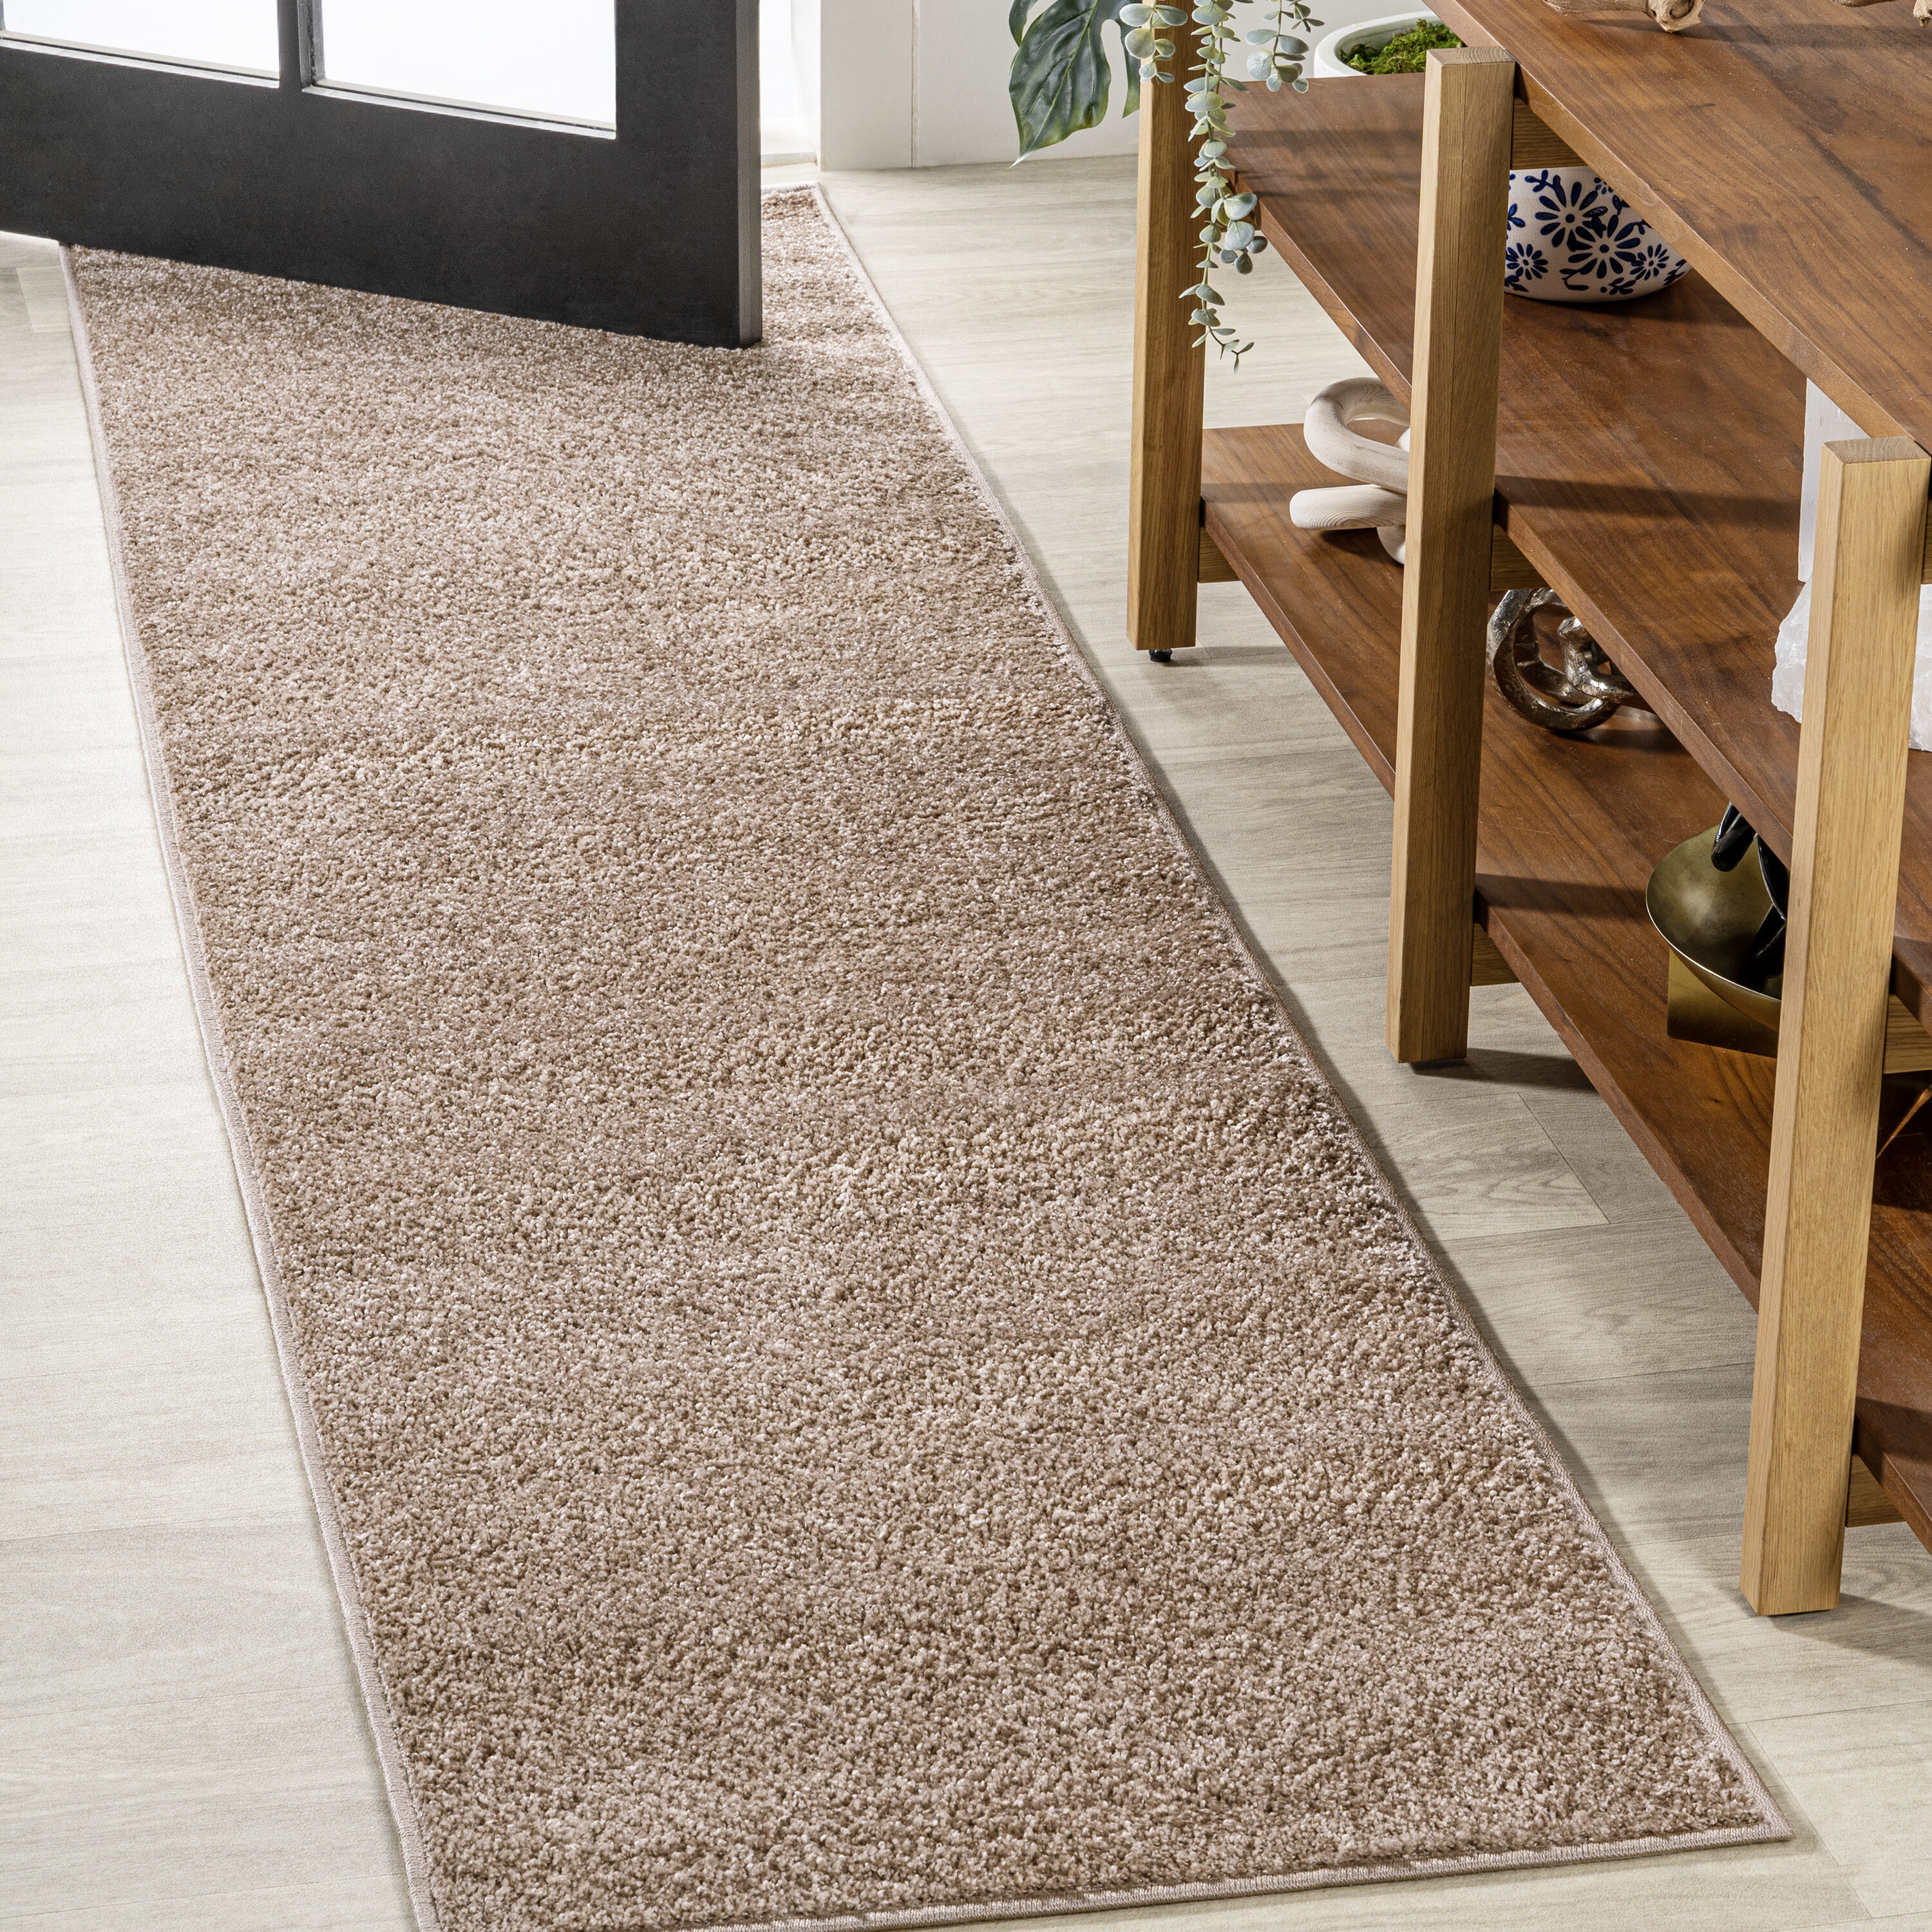 JONATHAN Y Haze Solid Low-Pile Light Gray 8 ft. x 10 ft. Area Rug